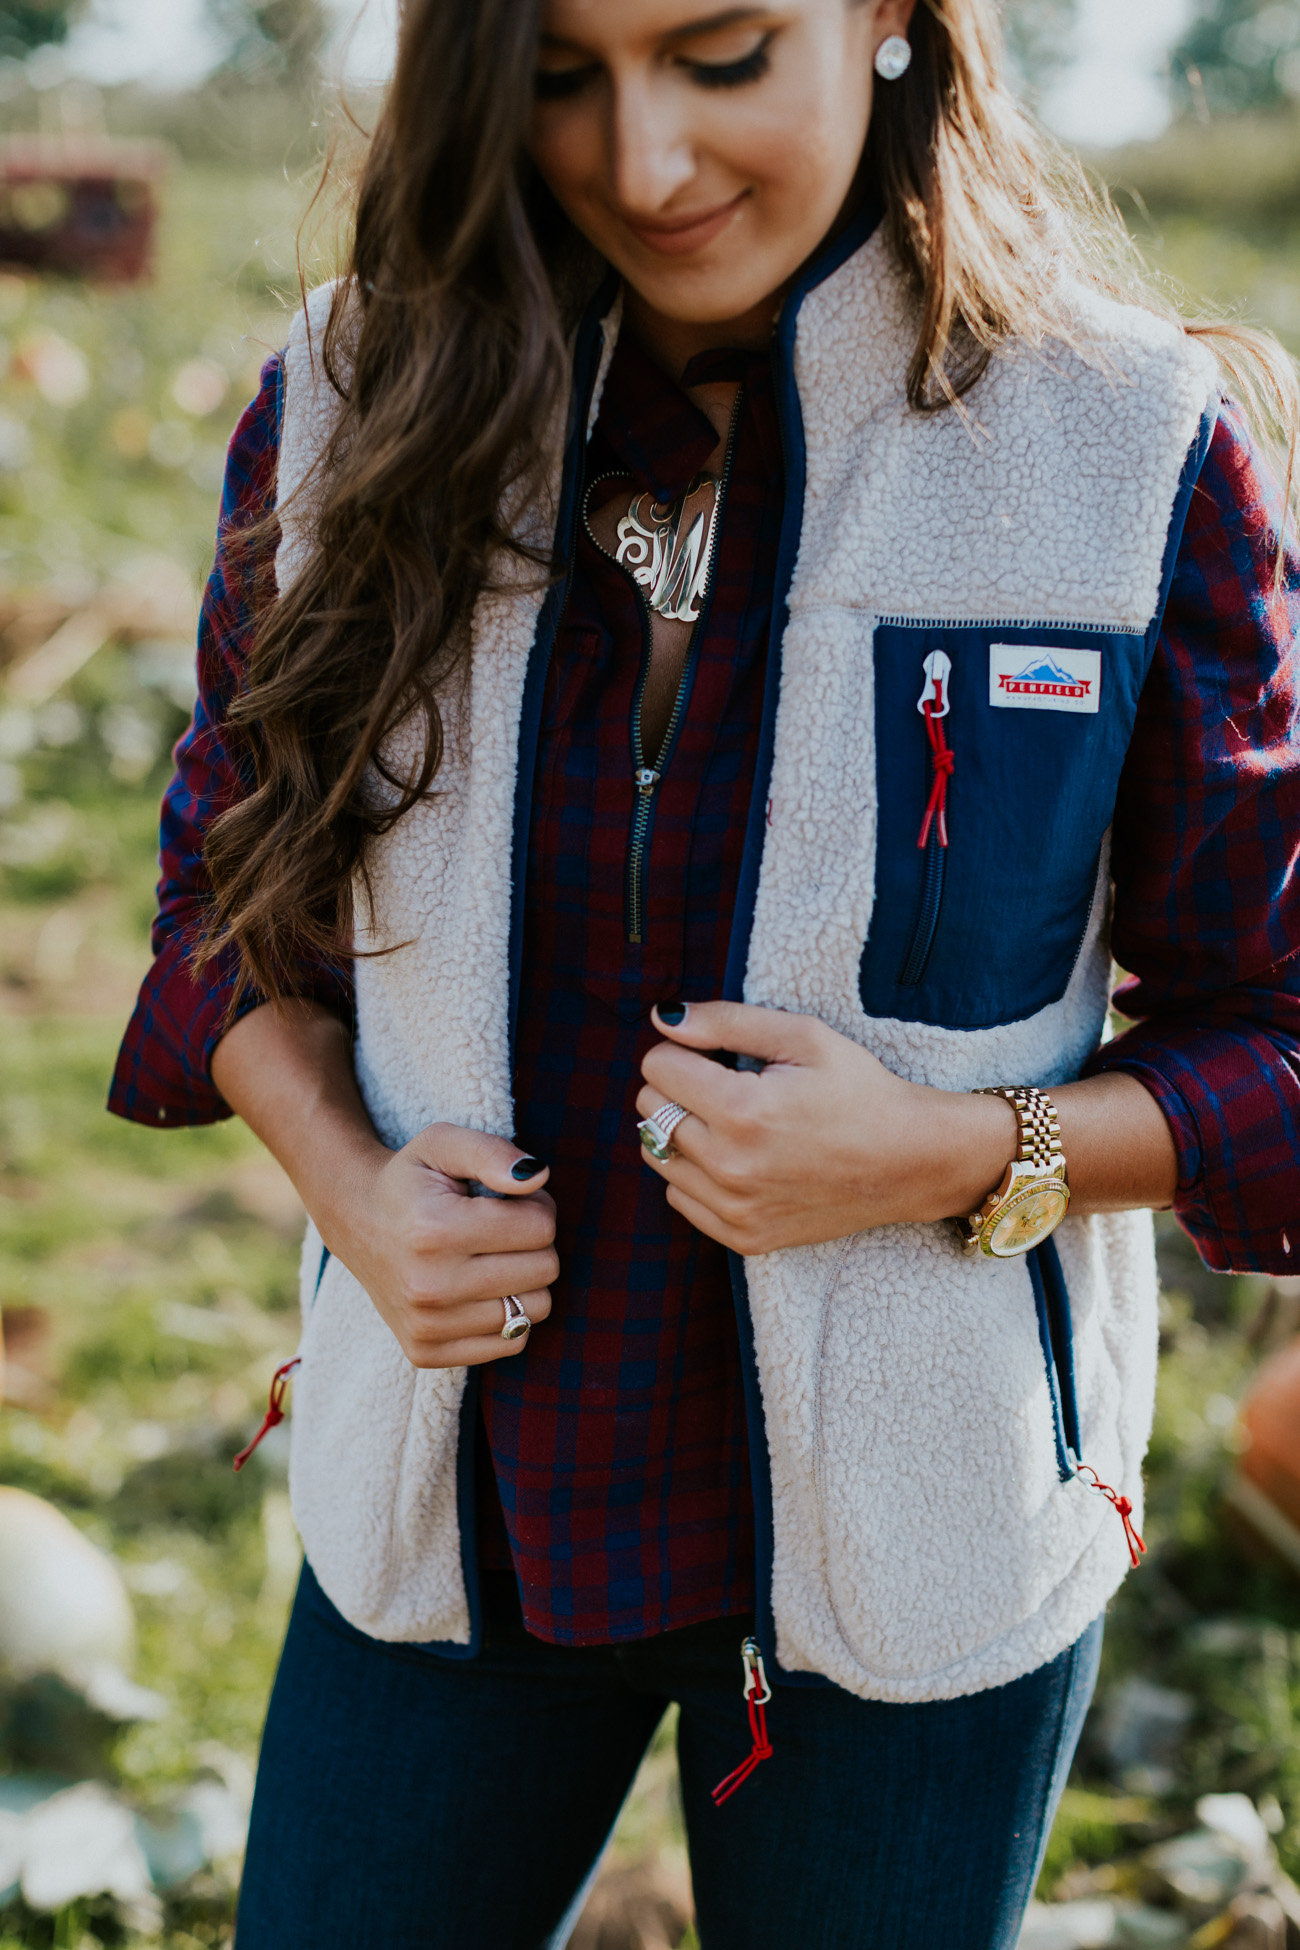 penfield lucan fleece vest, penfield at madewell, madewell plaid popover shirt, plaid shirt, pumpkin patch outfit, pumpkin picking outfit, cognac booties, fall brown booties, southern fashion blogger, fall style, fall fashion // grace wainwright a southern drawl